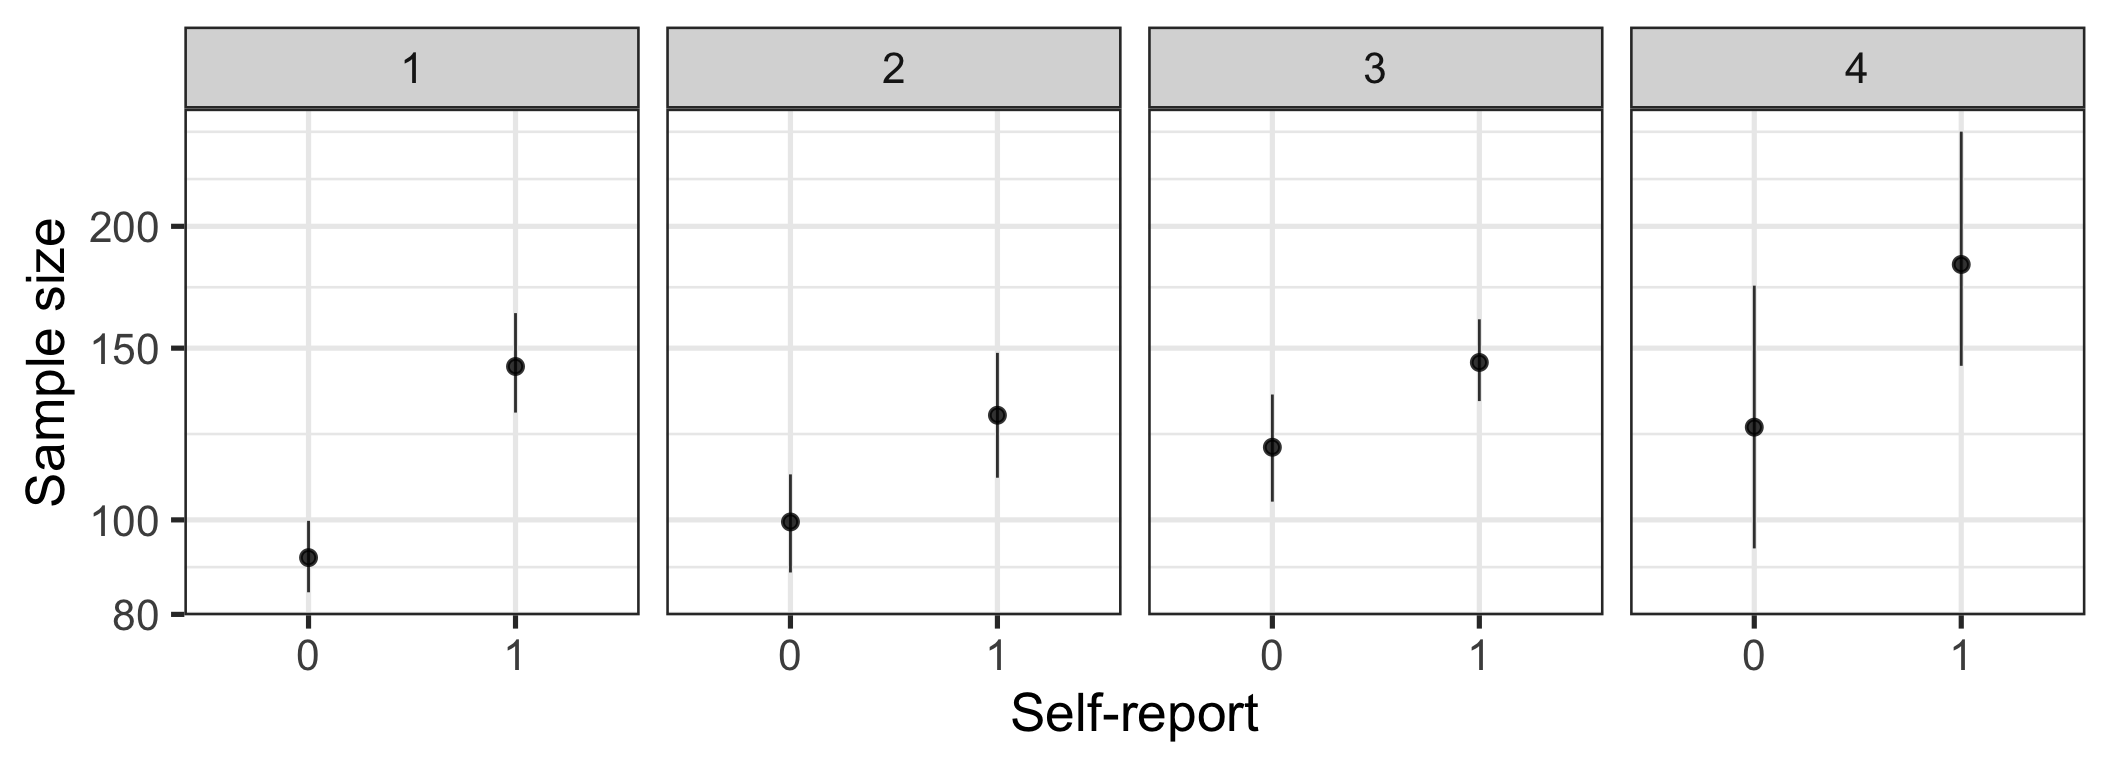 Sample size by self-report. Bootstrapped means and 95% CIs.